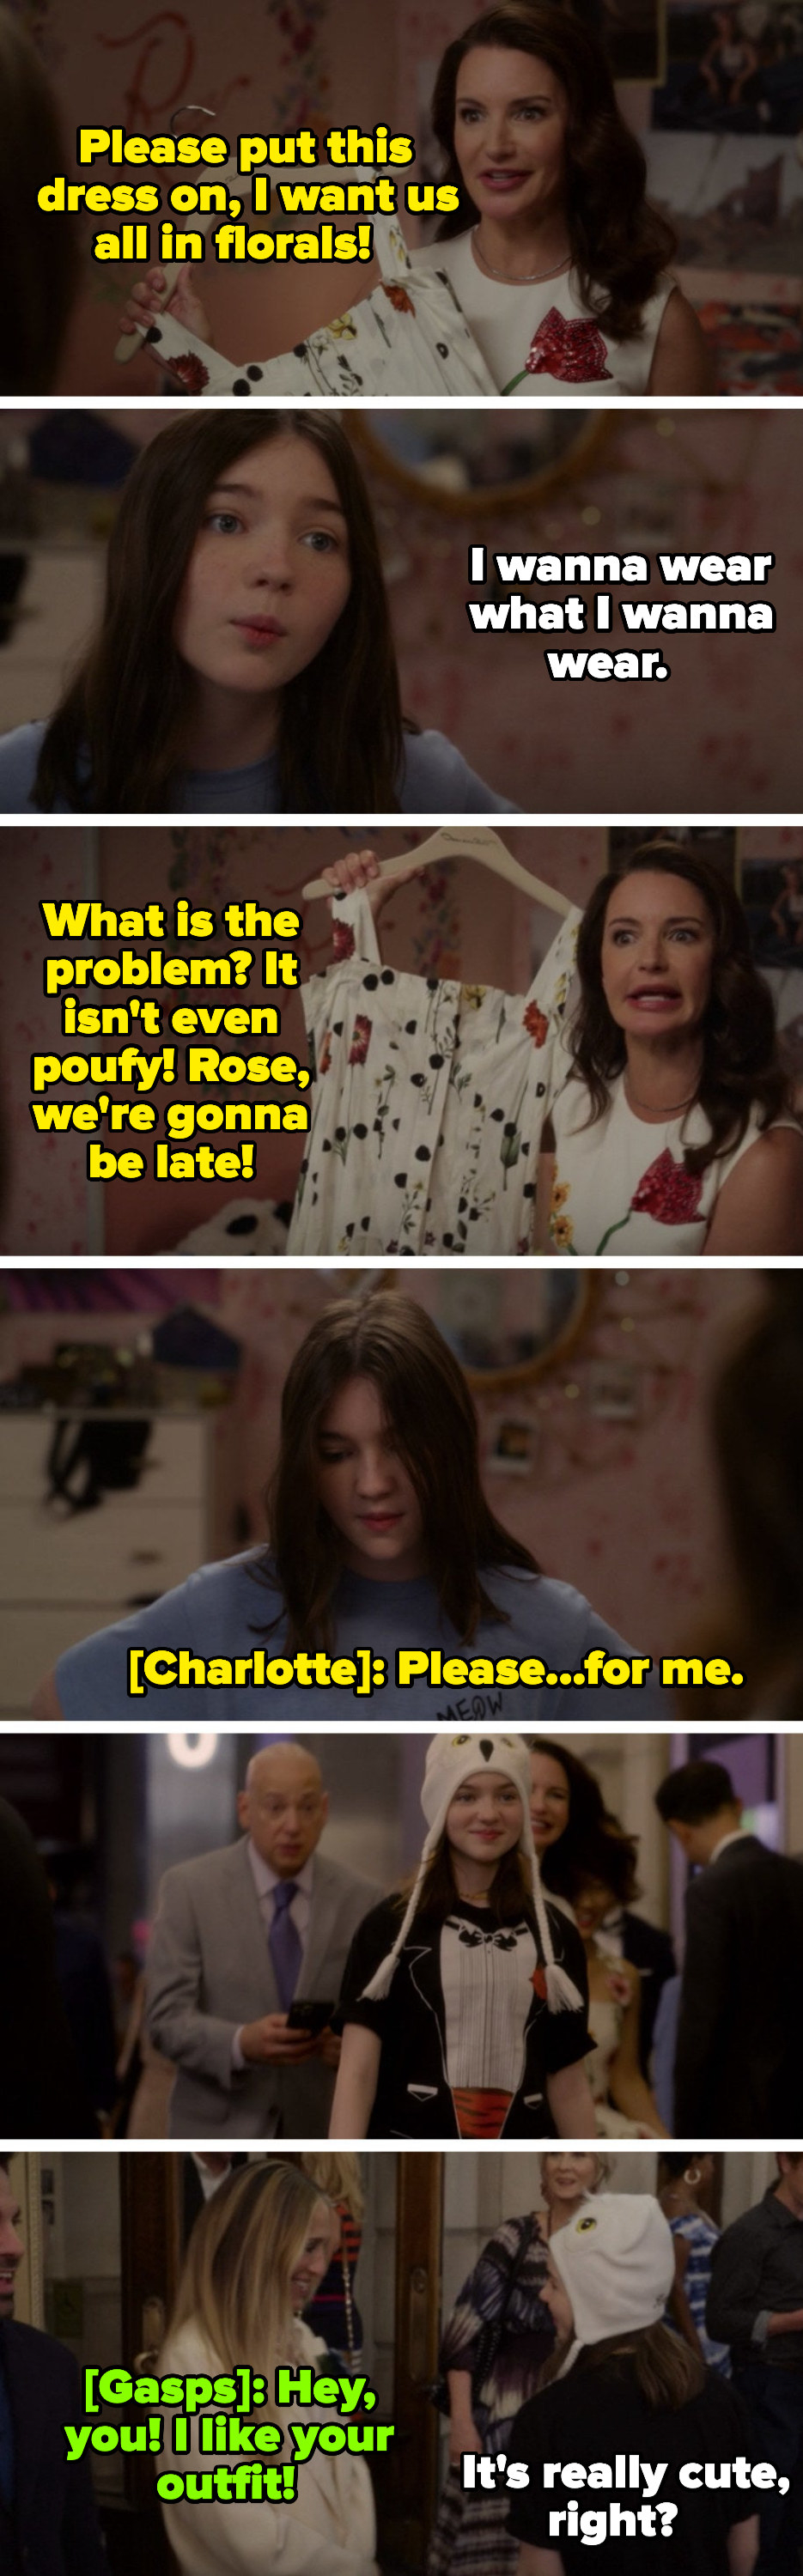 Charlotte forcing Rose to wear a floral dress, Rose wearing a tuxedo T-shirt over it, and Carrie complimenting Rose&#x27;s outfit: &quot;Hey, you! I like your outfit!&quot; Rose: &quot;It&#x27;s really cute, right?&quot;